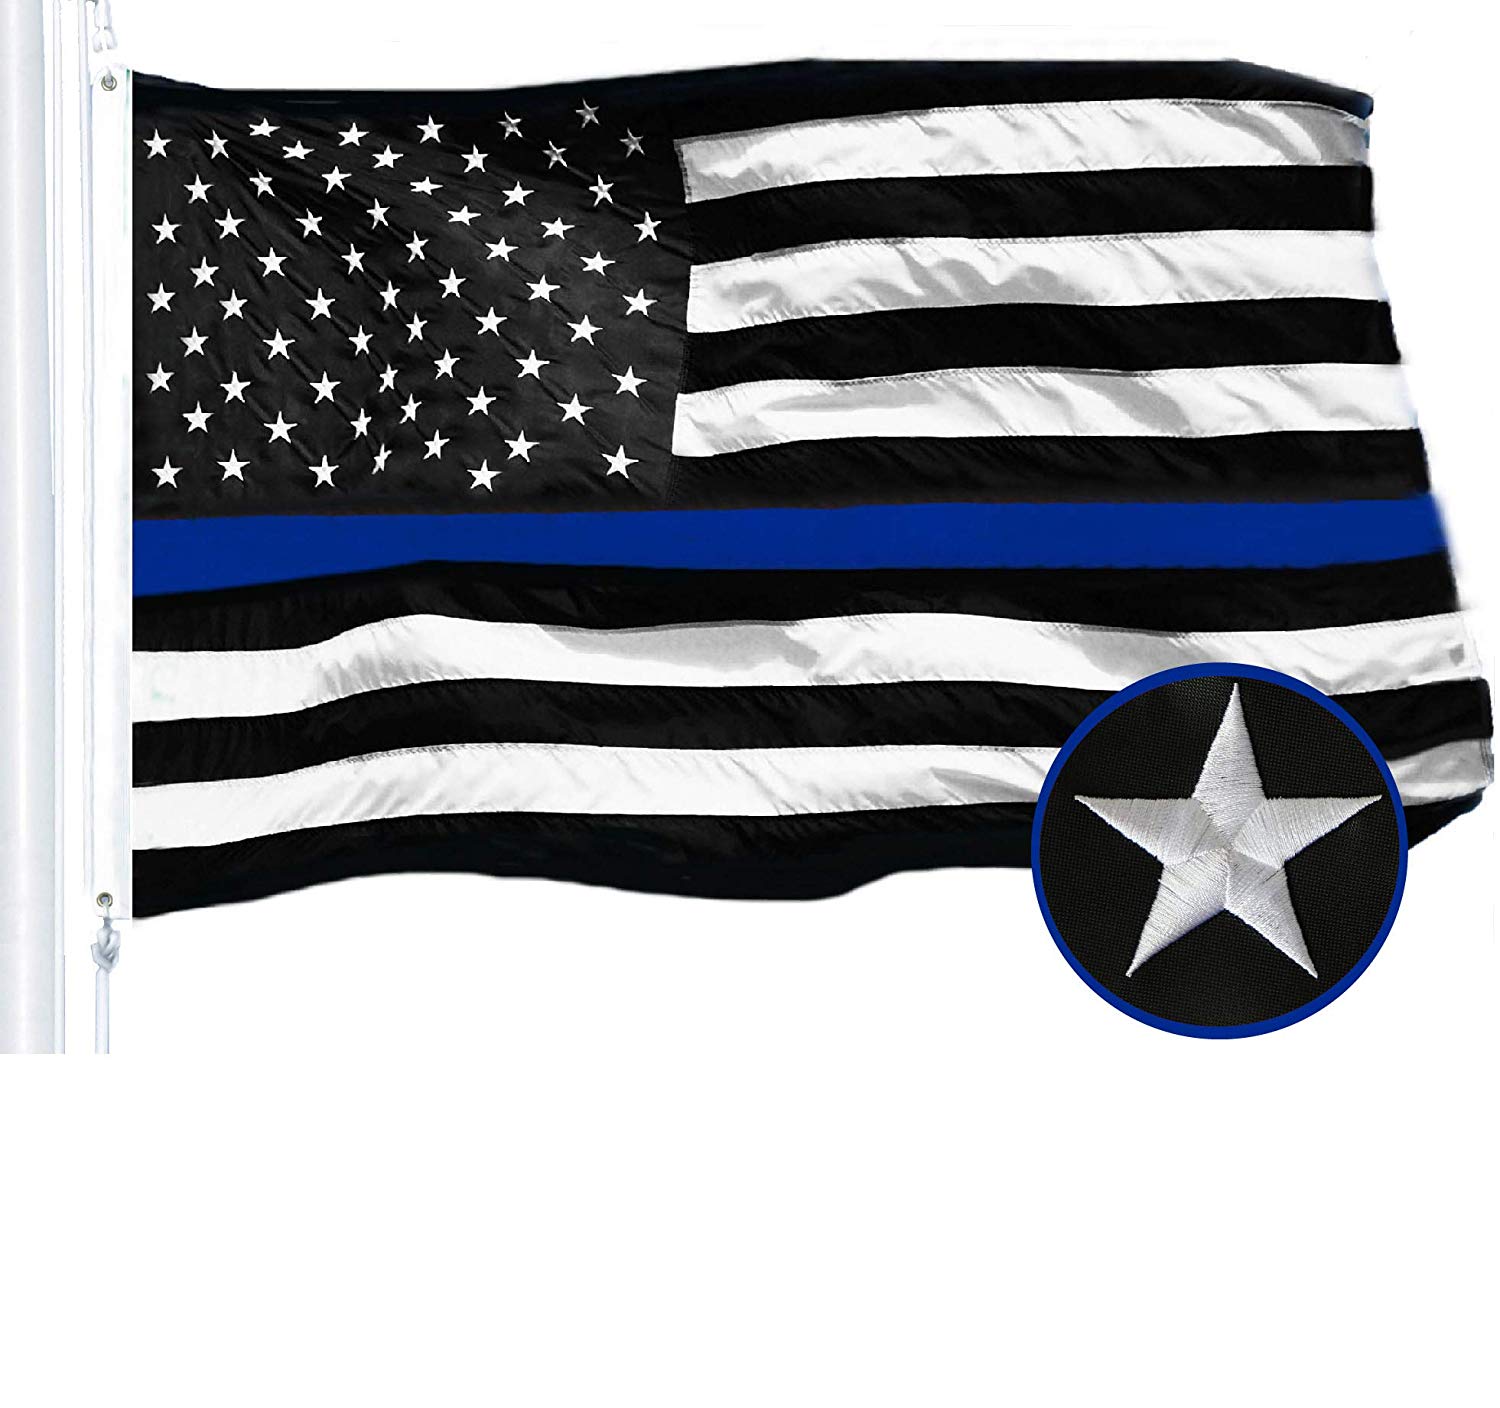 USA Thin Blue Line American Flag 3x5 Foot Heavy Duty Flags Embroidered Stars